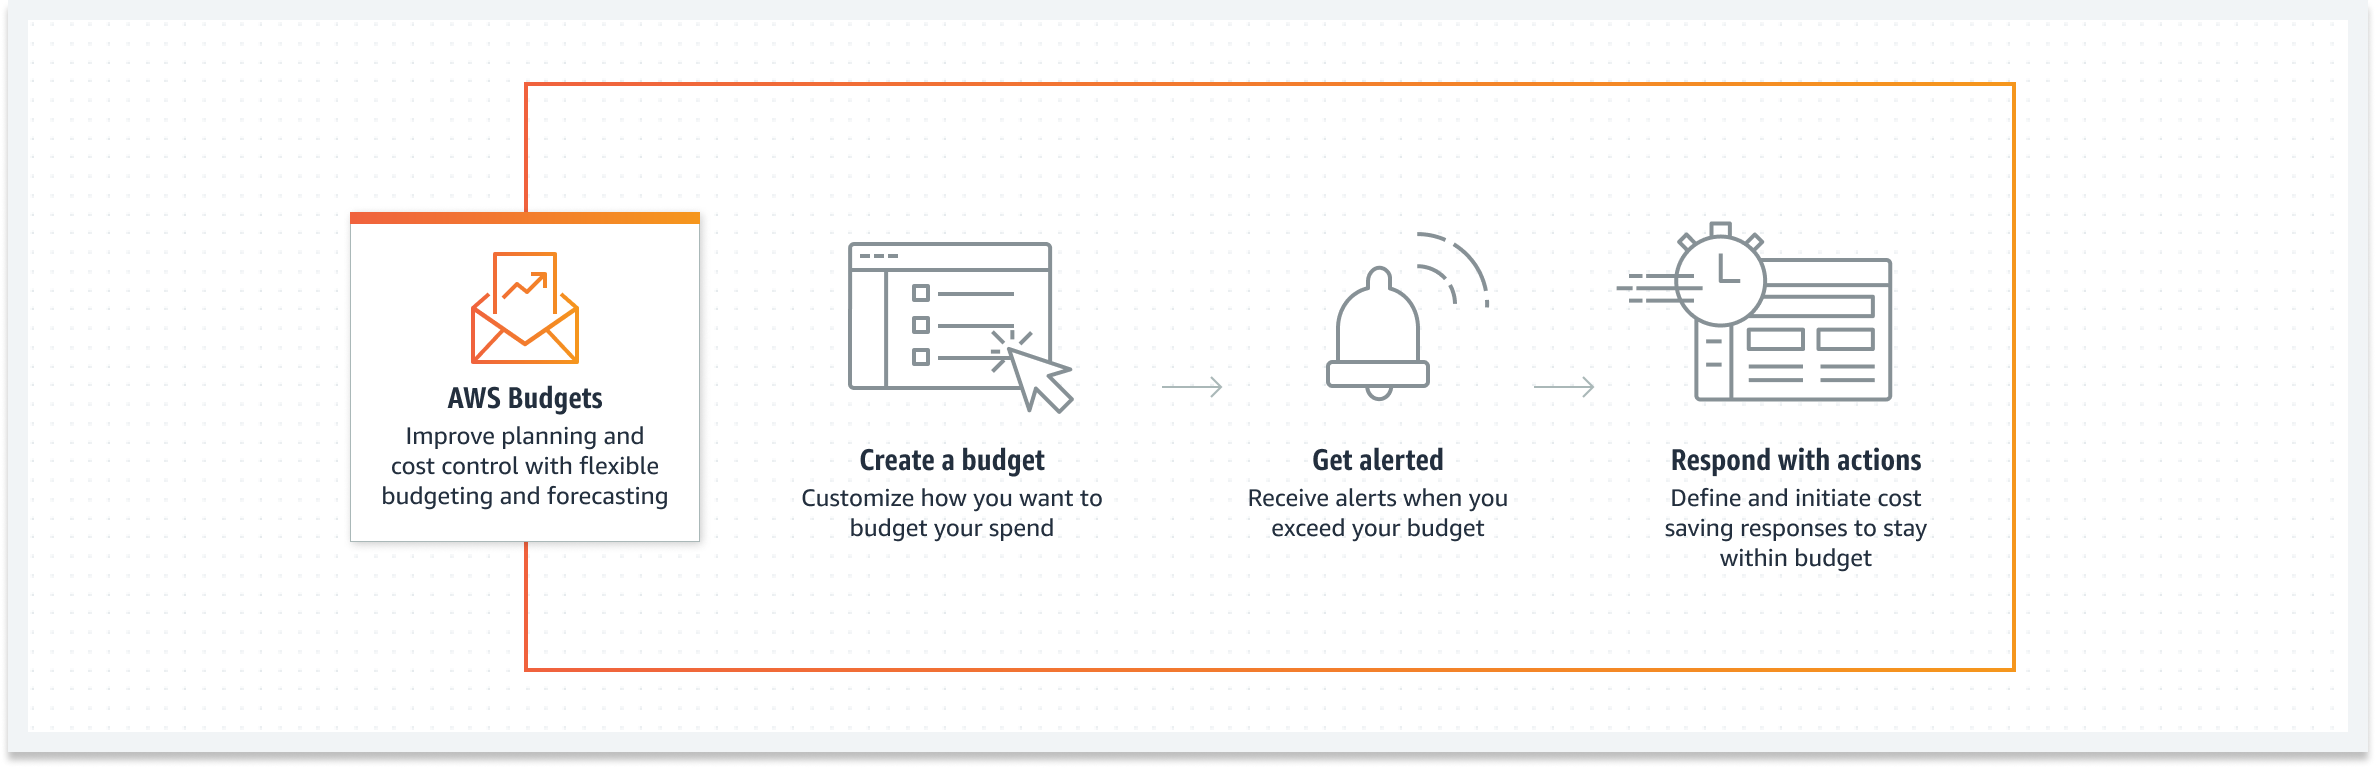 AWS Budgets can help users forecast and avoid a surprise cloud bill through budget creation and alerts